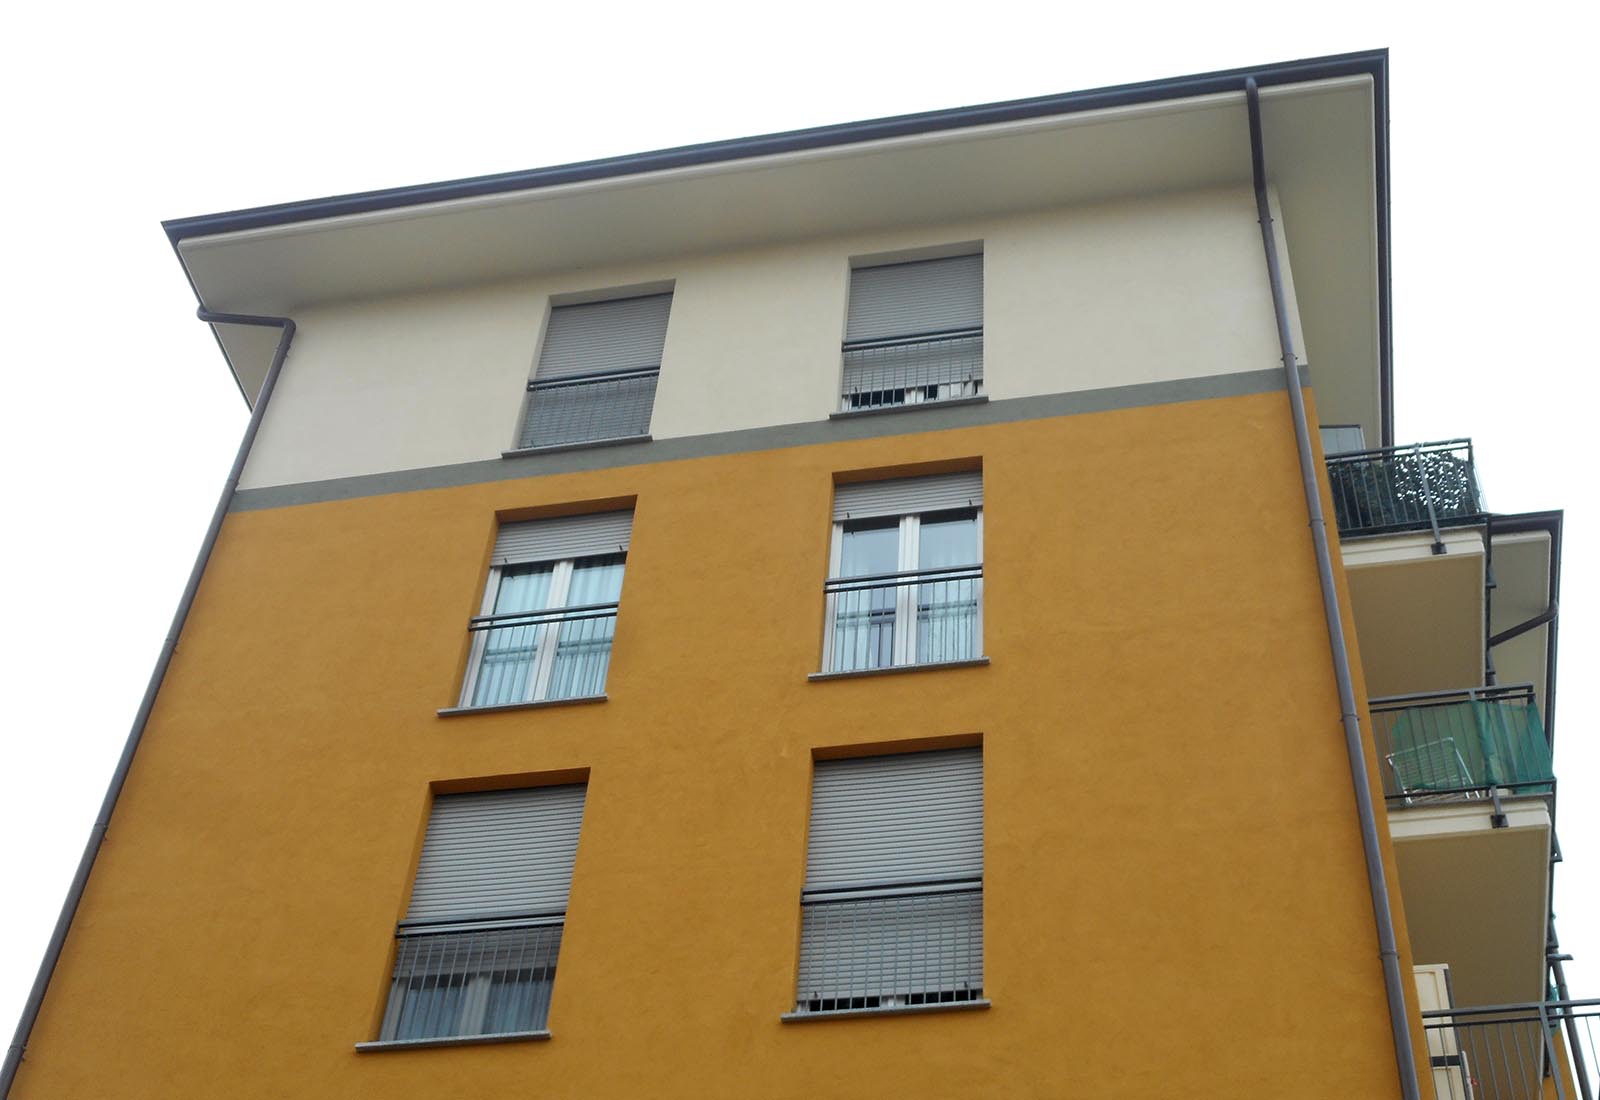 Residential building Aler property in Lissone - Detail of the facade